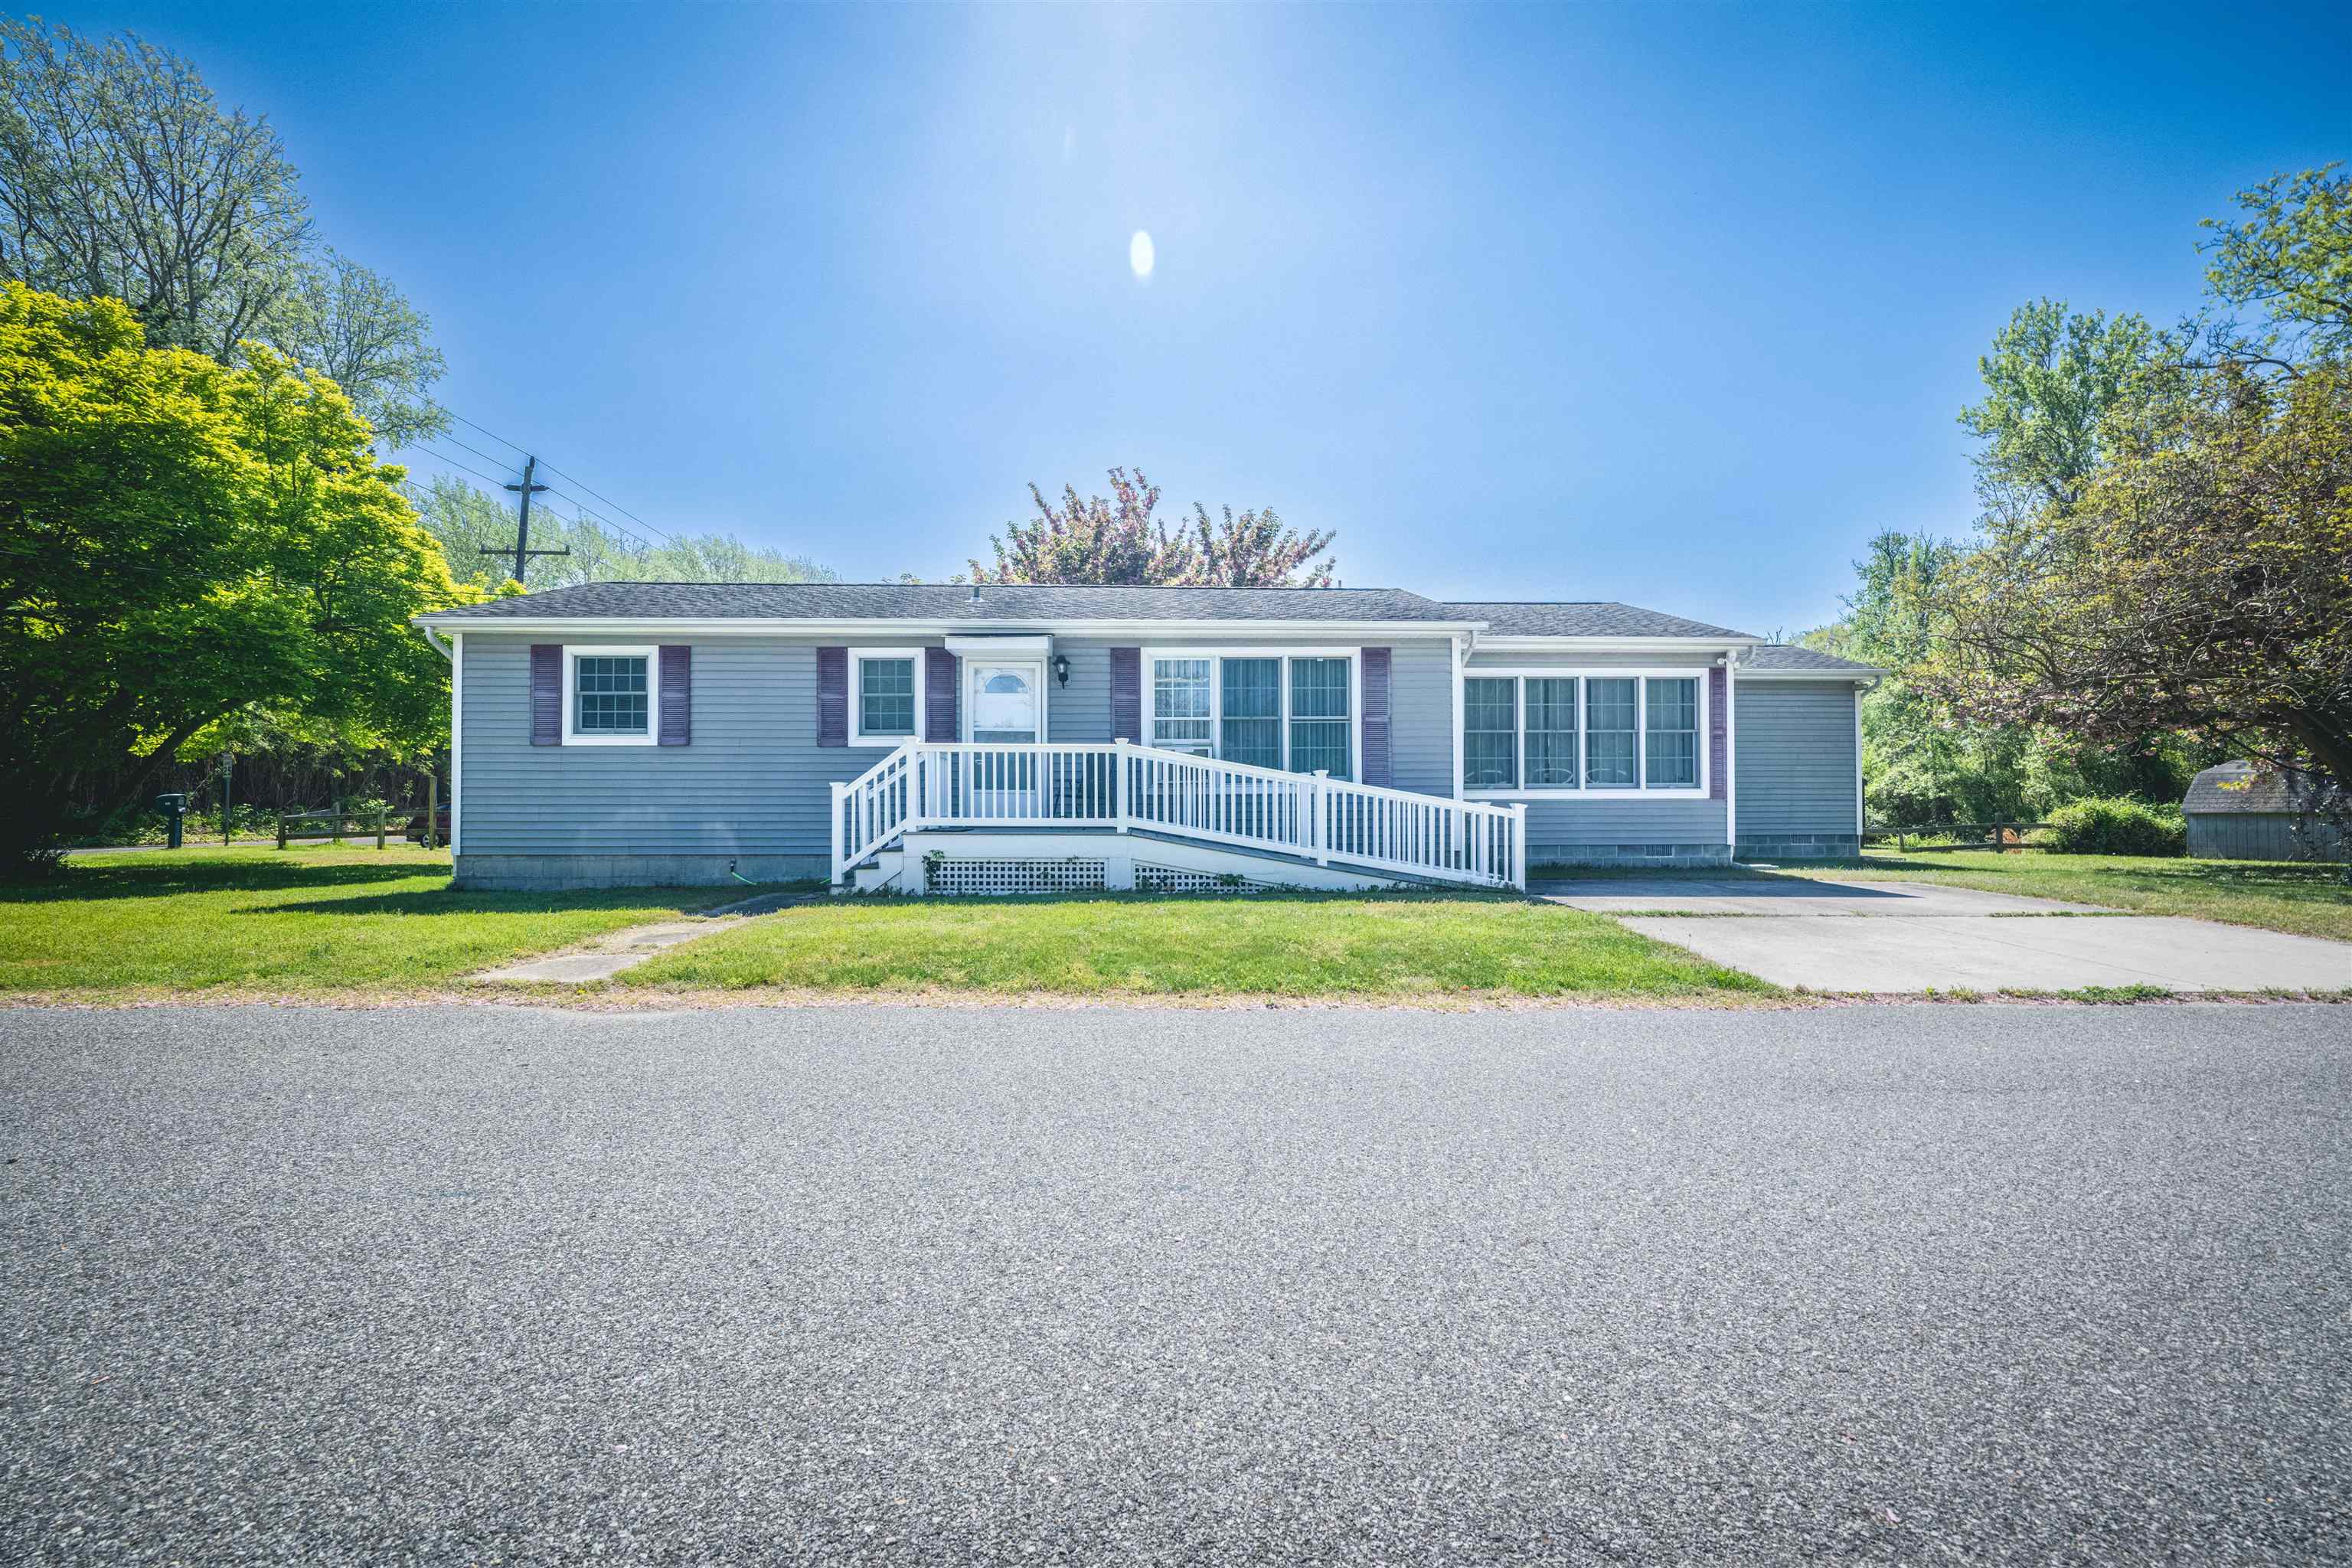 502 State, West Cape May, New Jersey, 08204, United States, 2 Bedrooms Bedrooms, ,2 BathroomsBathrooms,Residential,For Sale,502 State,1478894